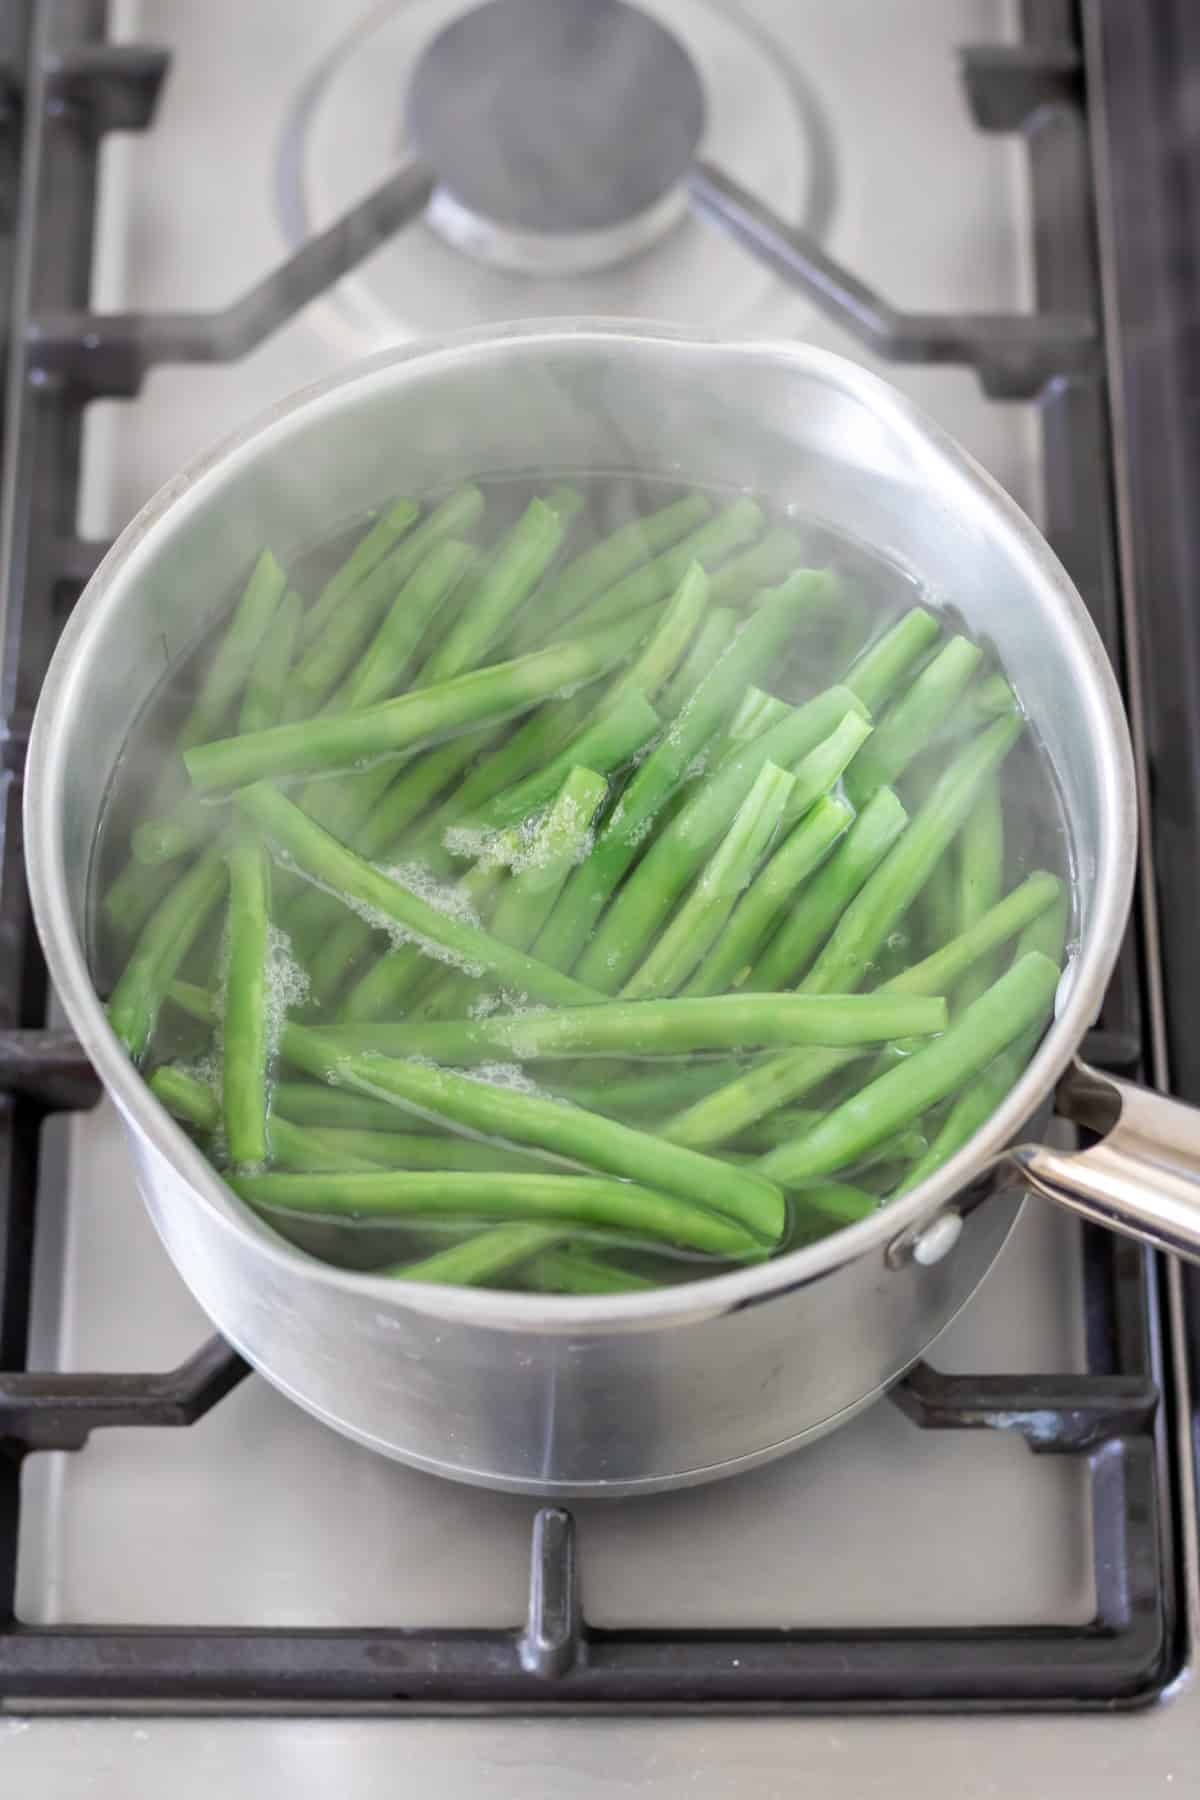 Simmering green beans on the stovetop.